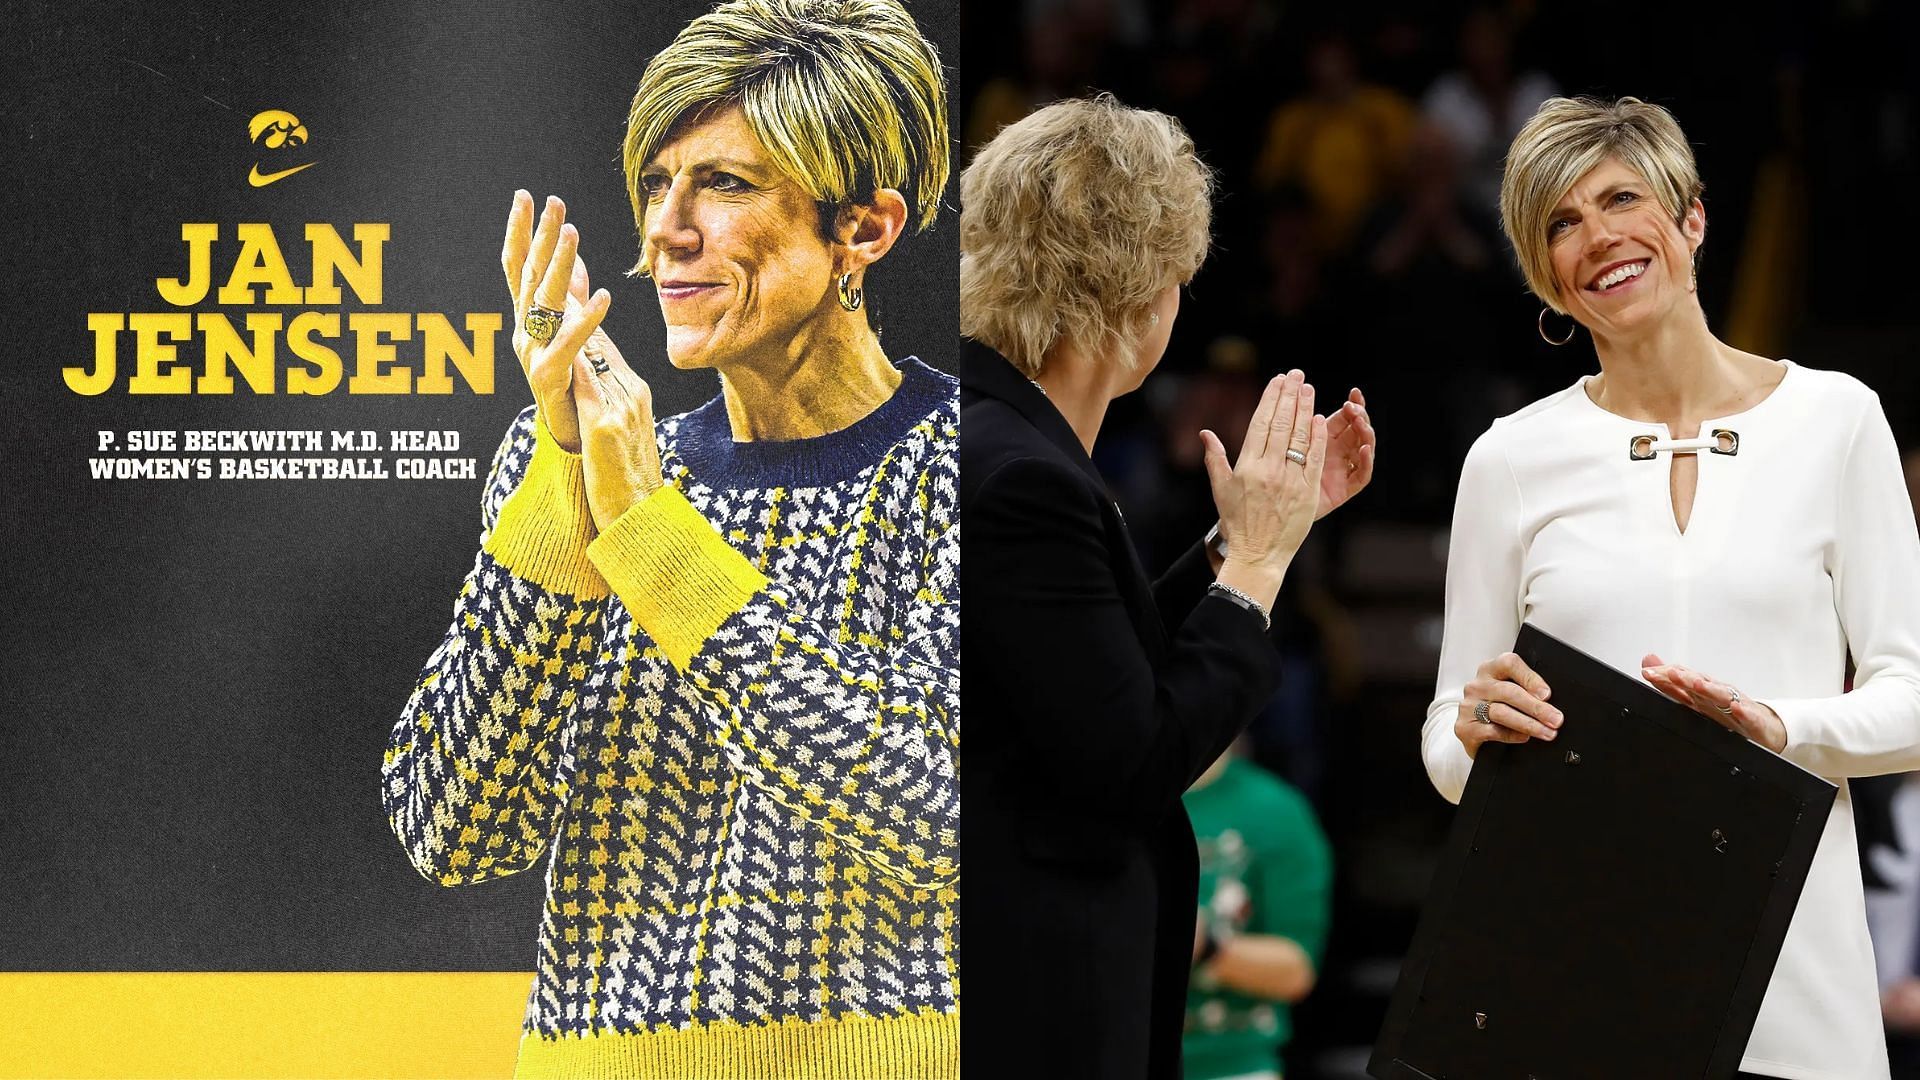 Jan Jensen made her introductory press conference on Wednesday